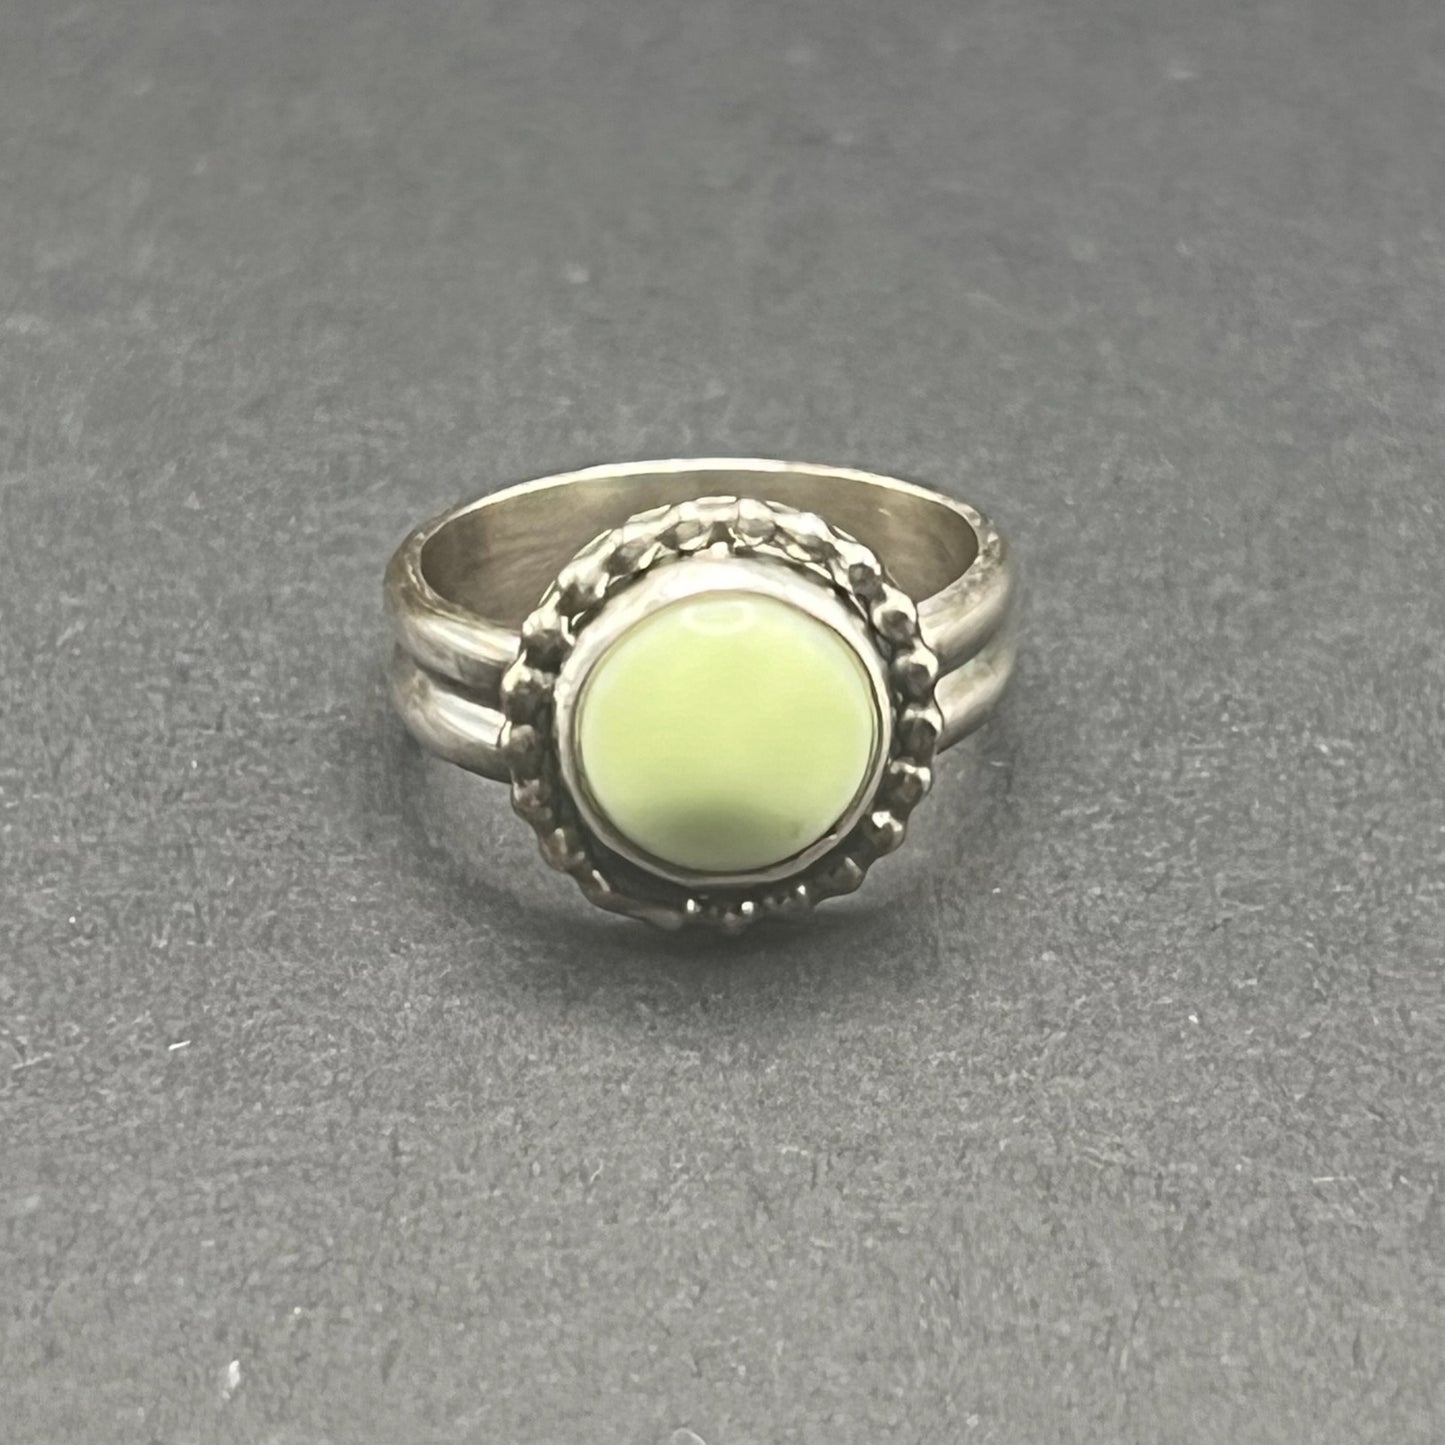 Image shows front side of Lemon Chrysoprase Feature Ring.  Stone is 10mm round, matte, sunny pale yellow color.  